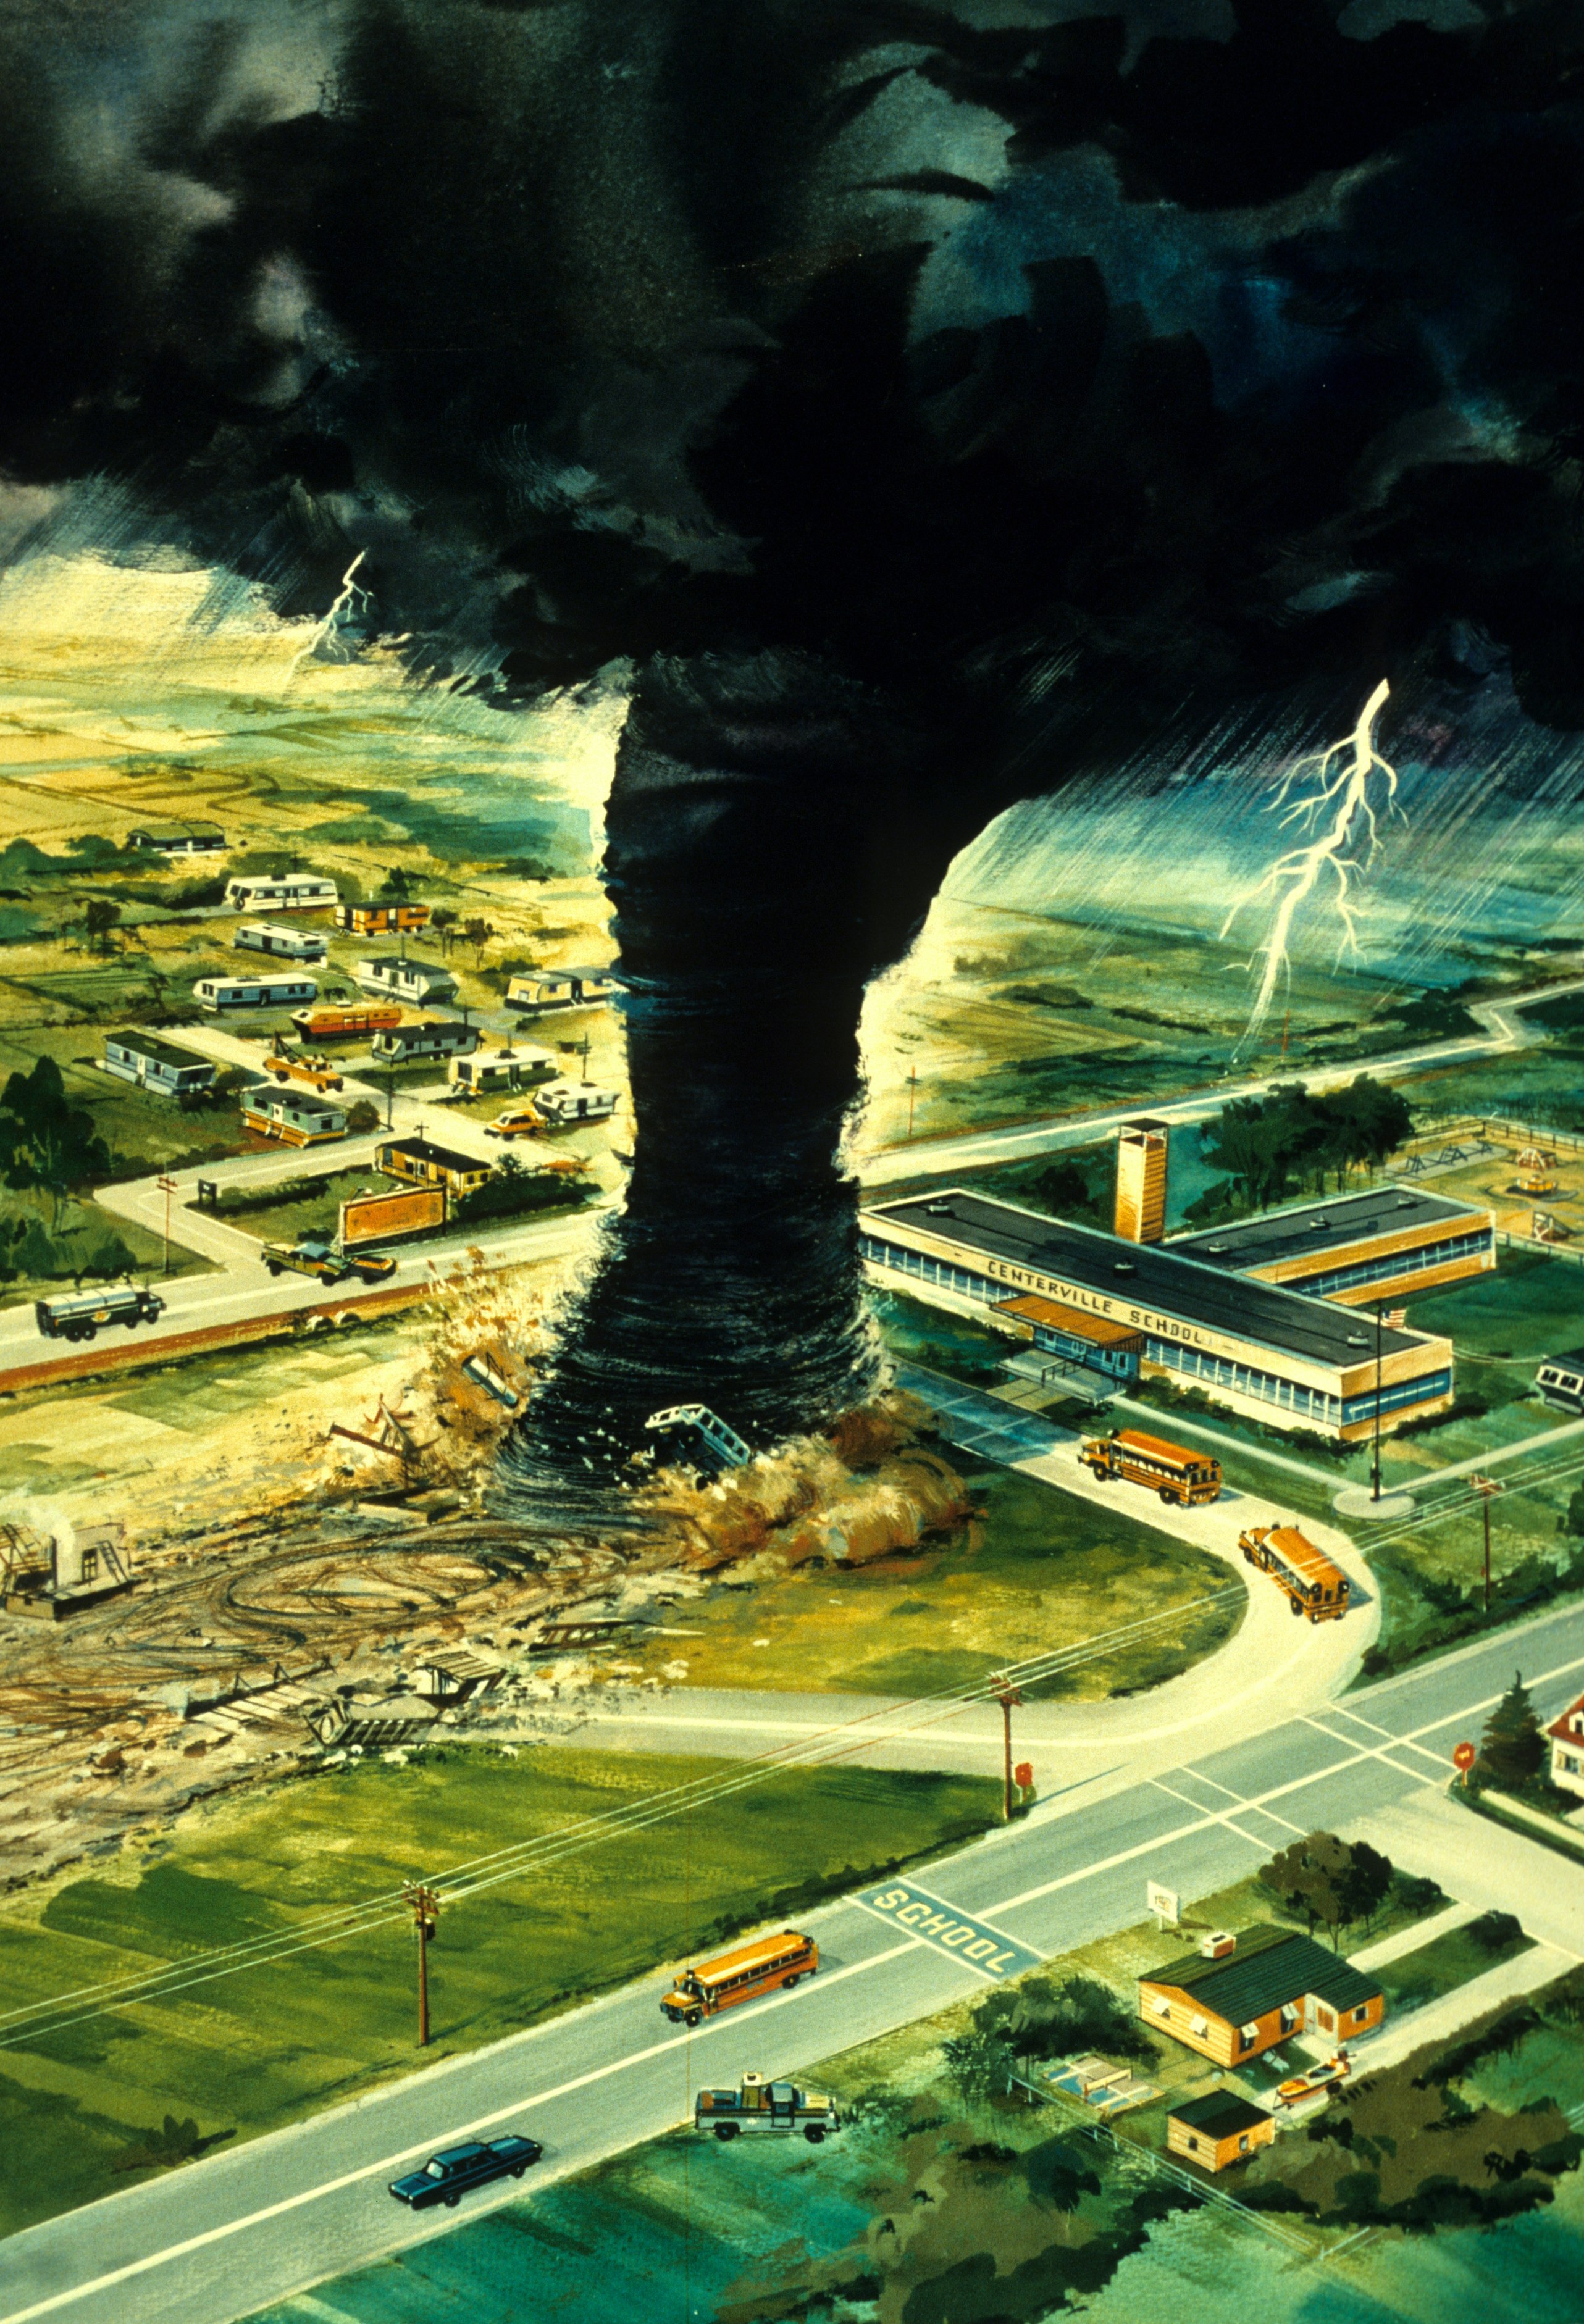 Artist's rendition of a tornado about to strike a school at the worst possible time while school buses are loading. 